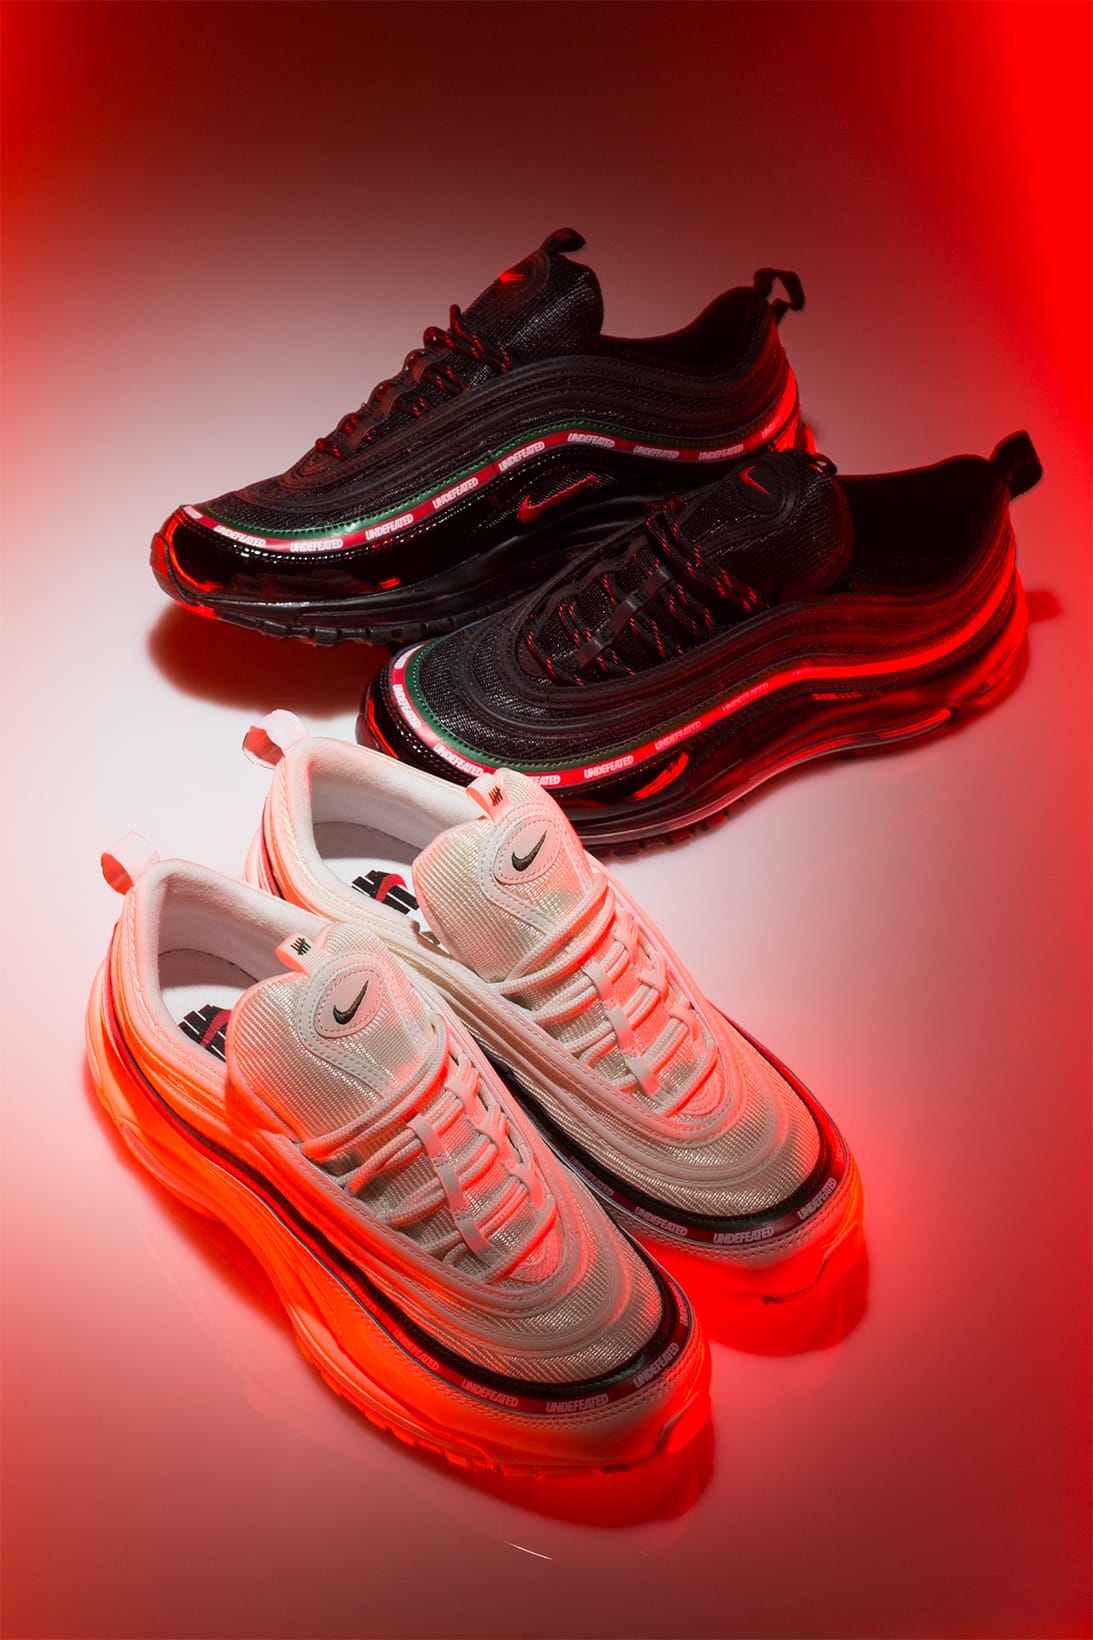 UNDEFEATED x Nike Air Max 97 Apparel | HYPEBEAST